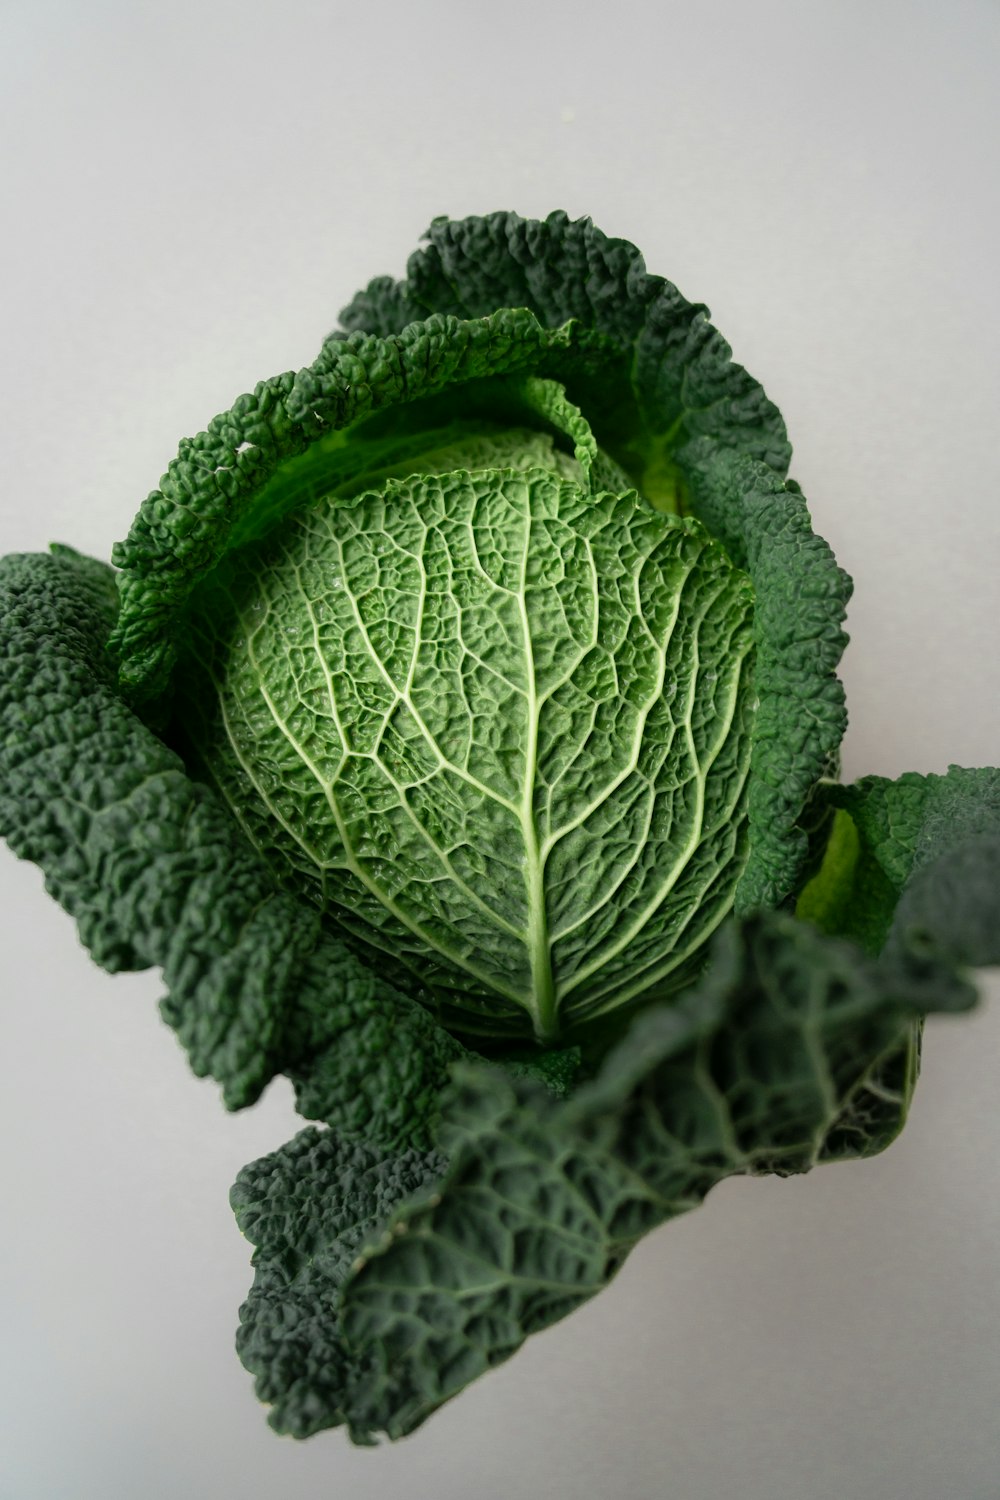 a close up of a green leafy vegetable